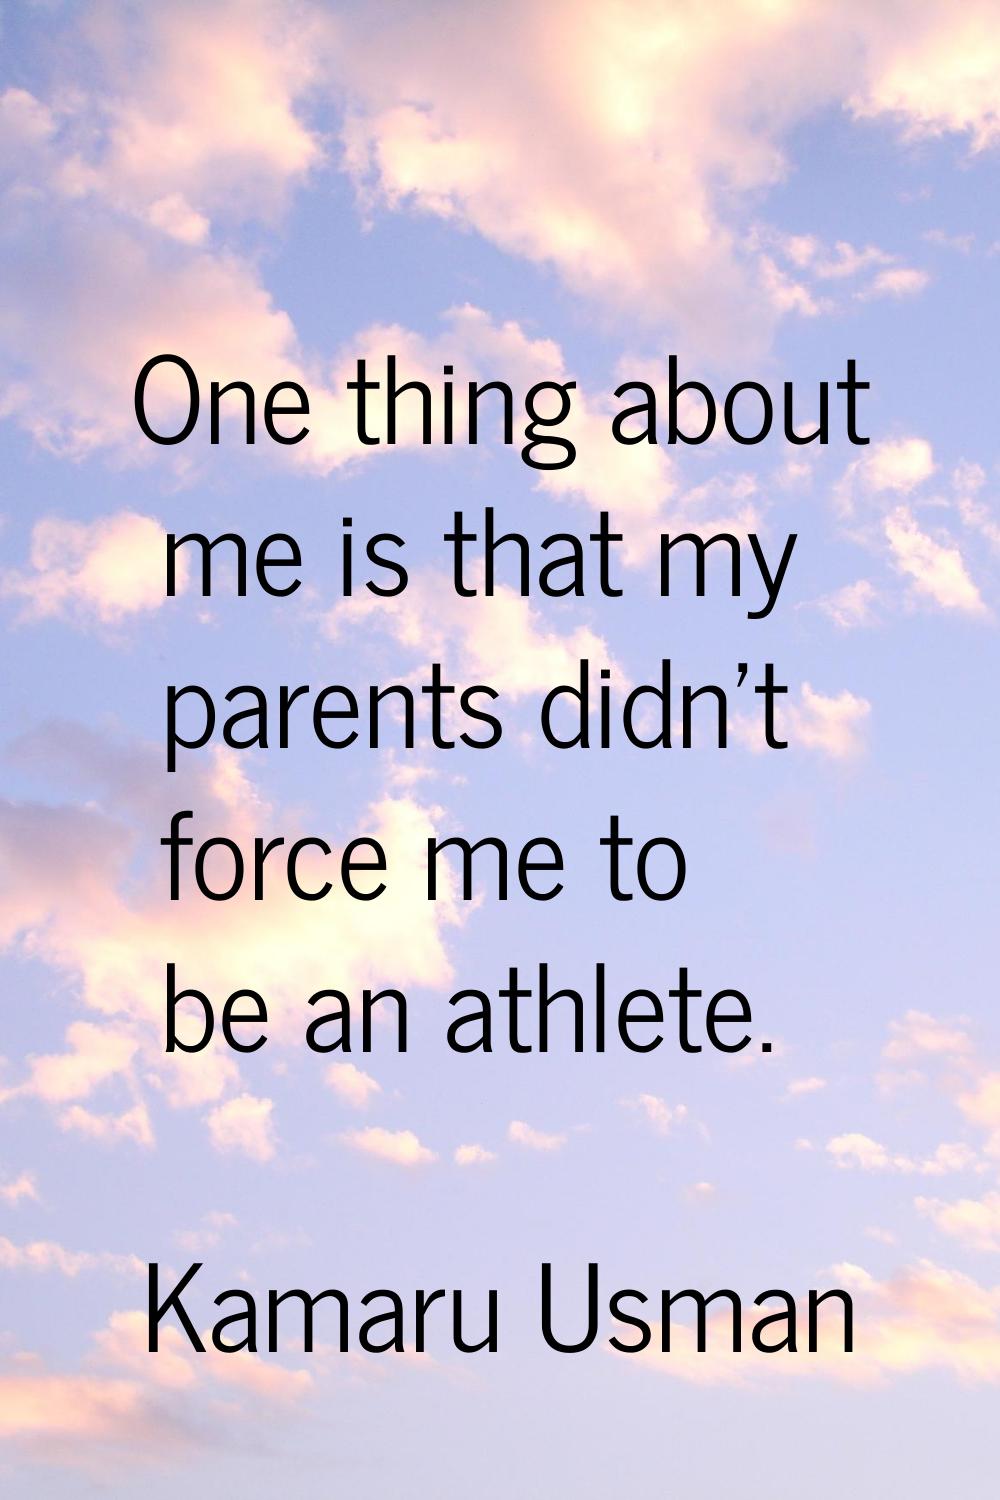 One thing about me is that my parents didn't force me to be an athlete.